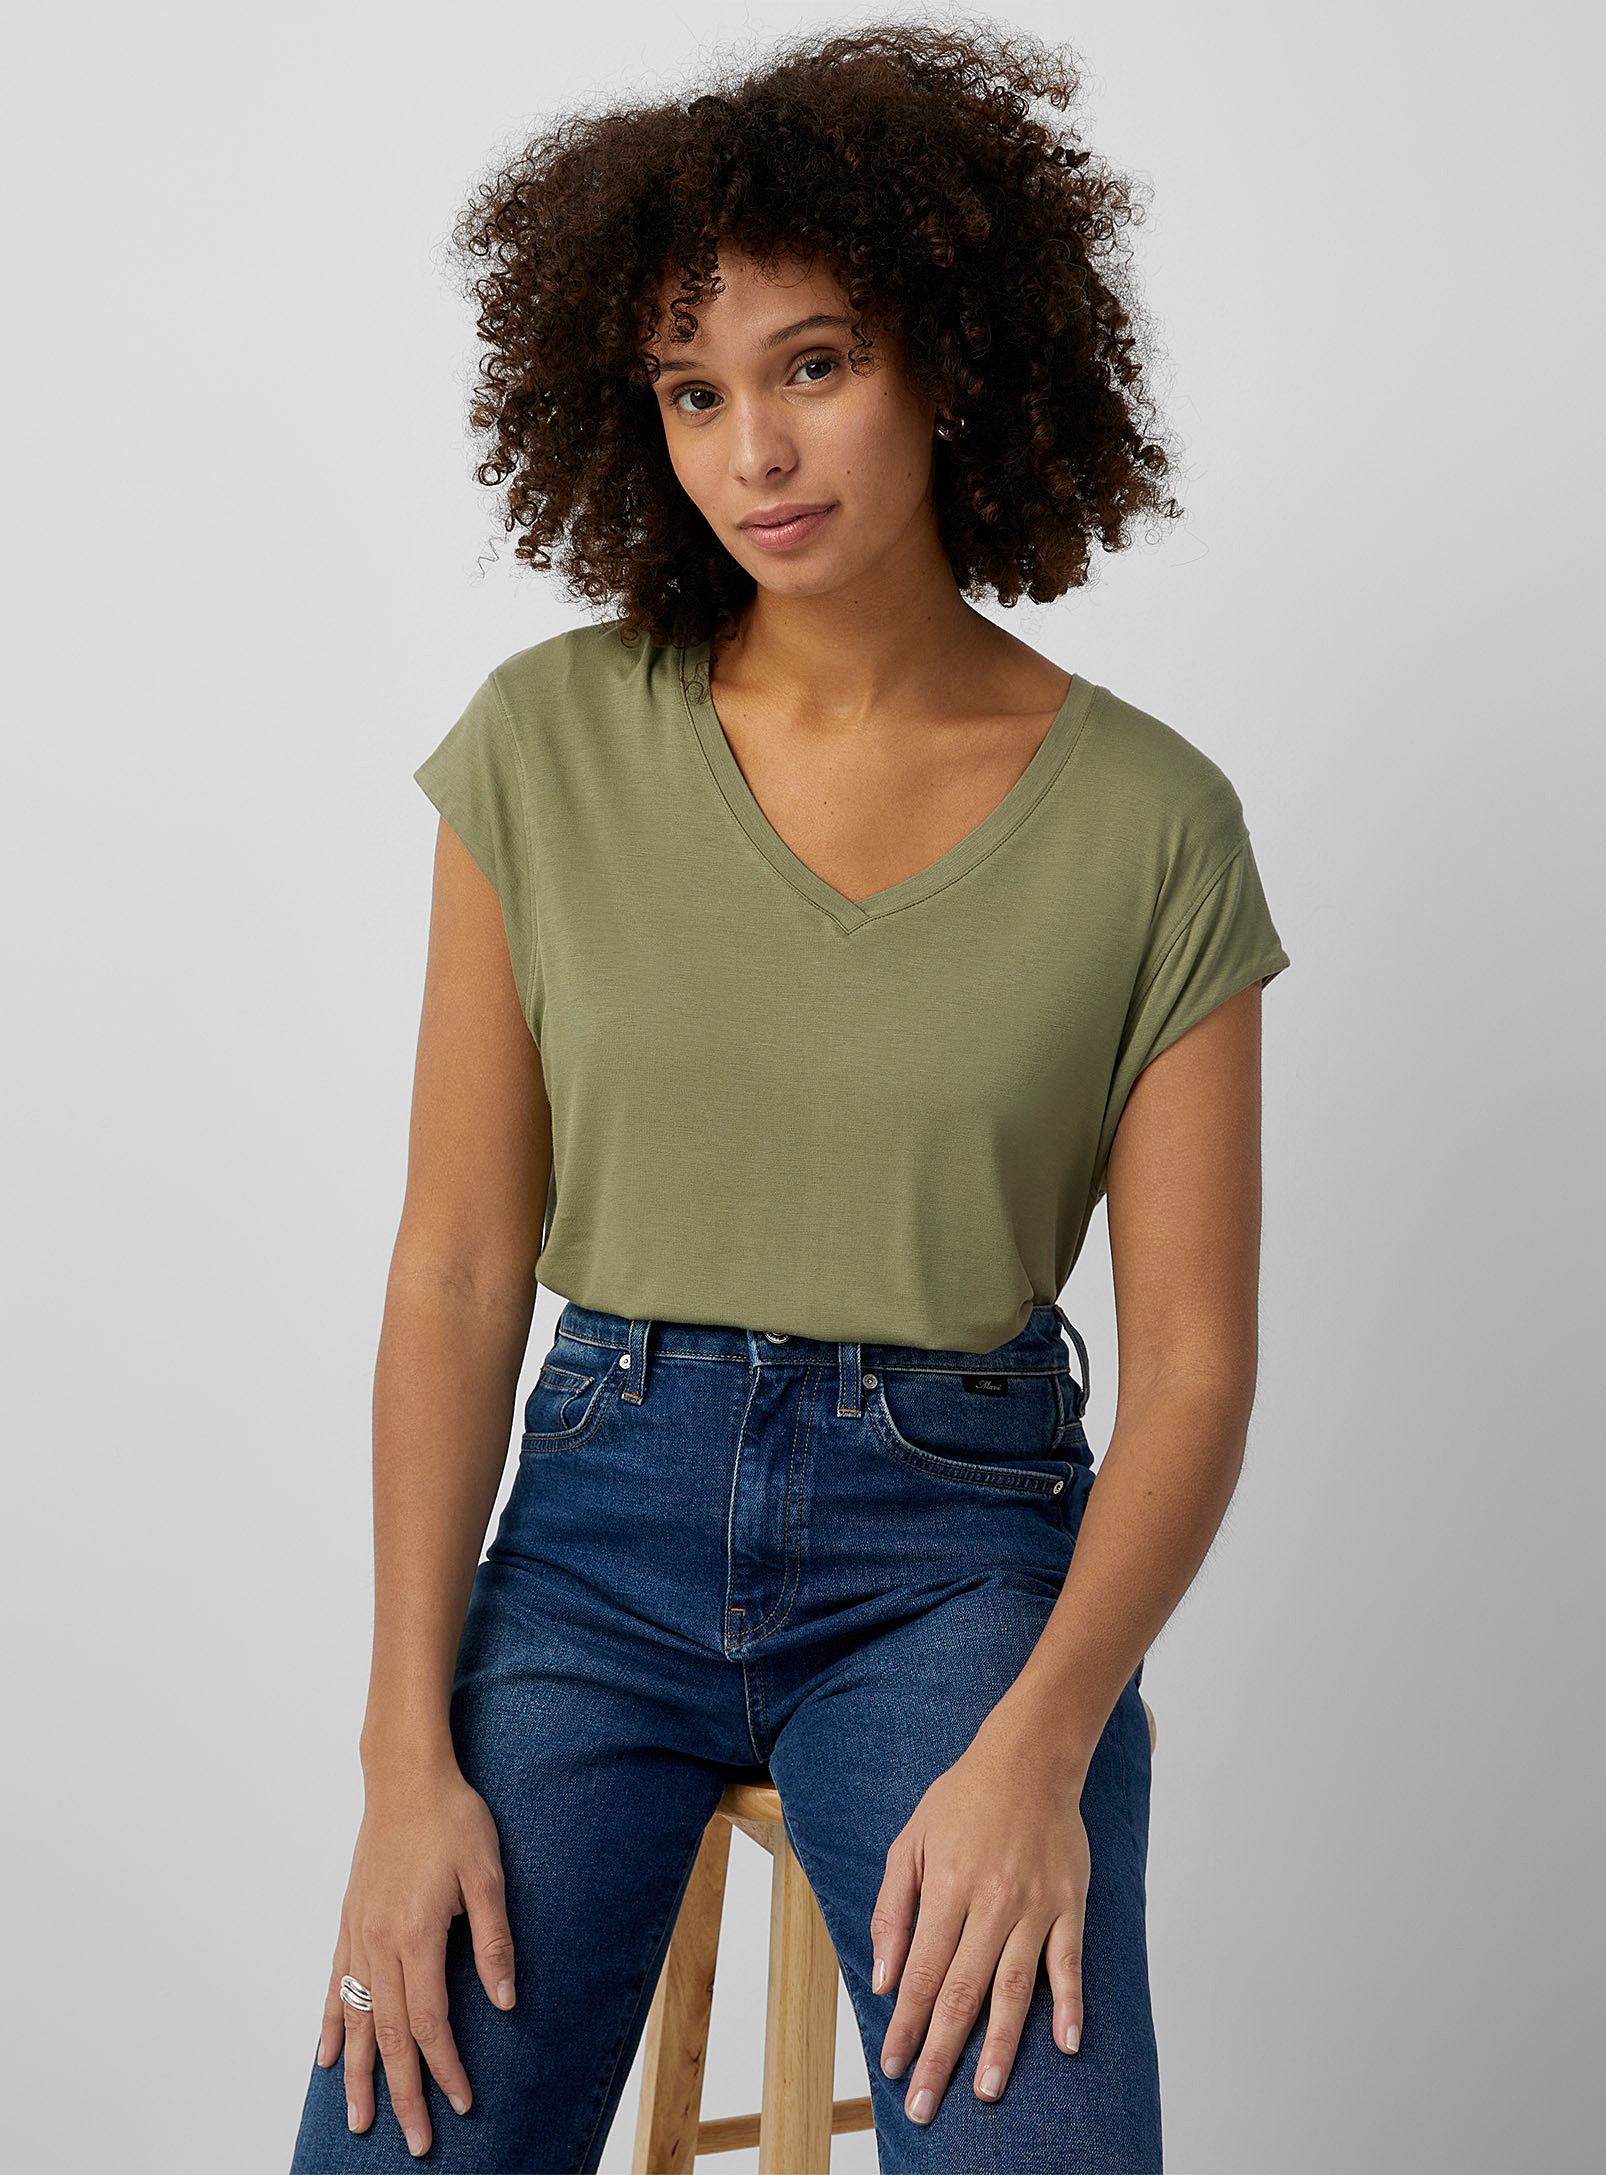 Contemporaine Cap-sleeve Flowy T-shirt In Mossy Green